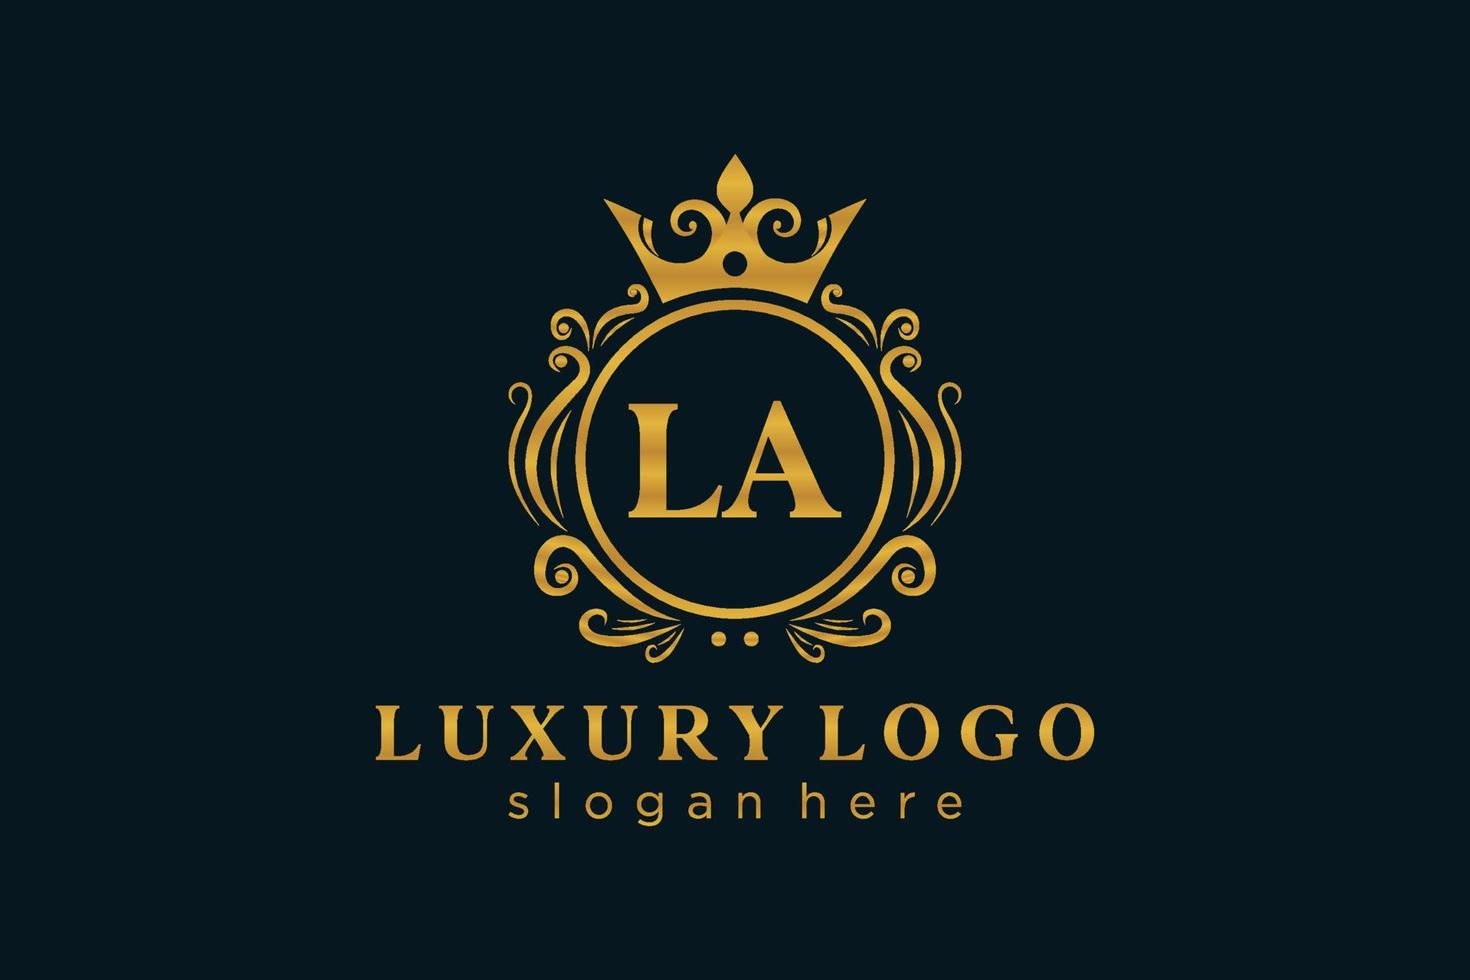 Initial LA Letter Royal Luxury Logo template in vector art for Restaurant, Royalty, Boutique, Cafe, Hotel, Heraldic, Jewelry, Fashion and other vector illustration.